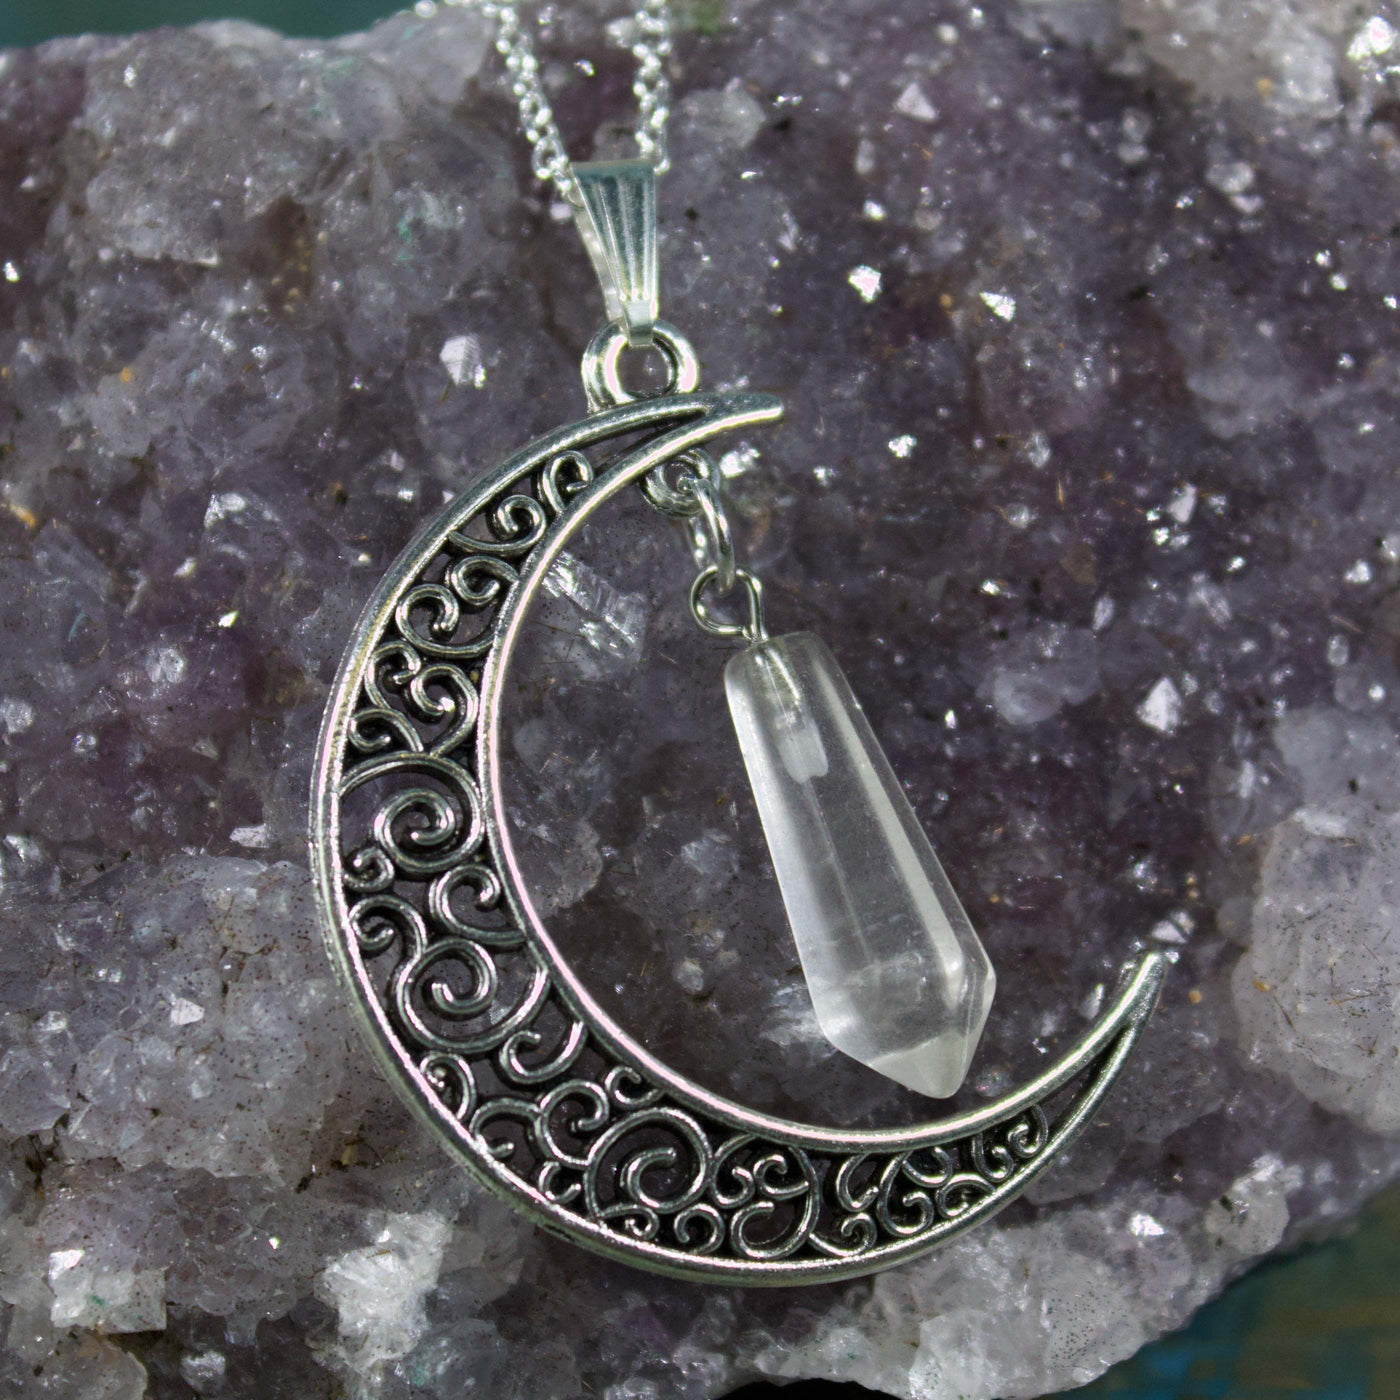 Hang it from the Moon Crystal Dreams Necklace